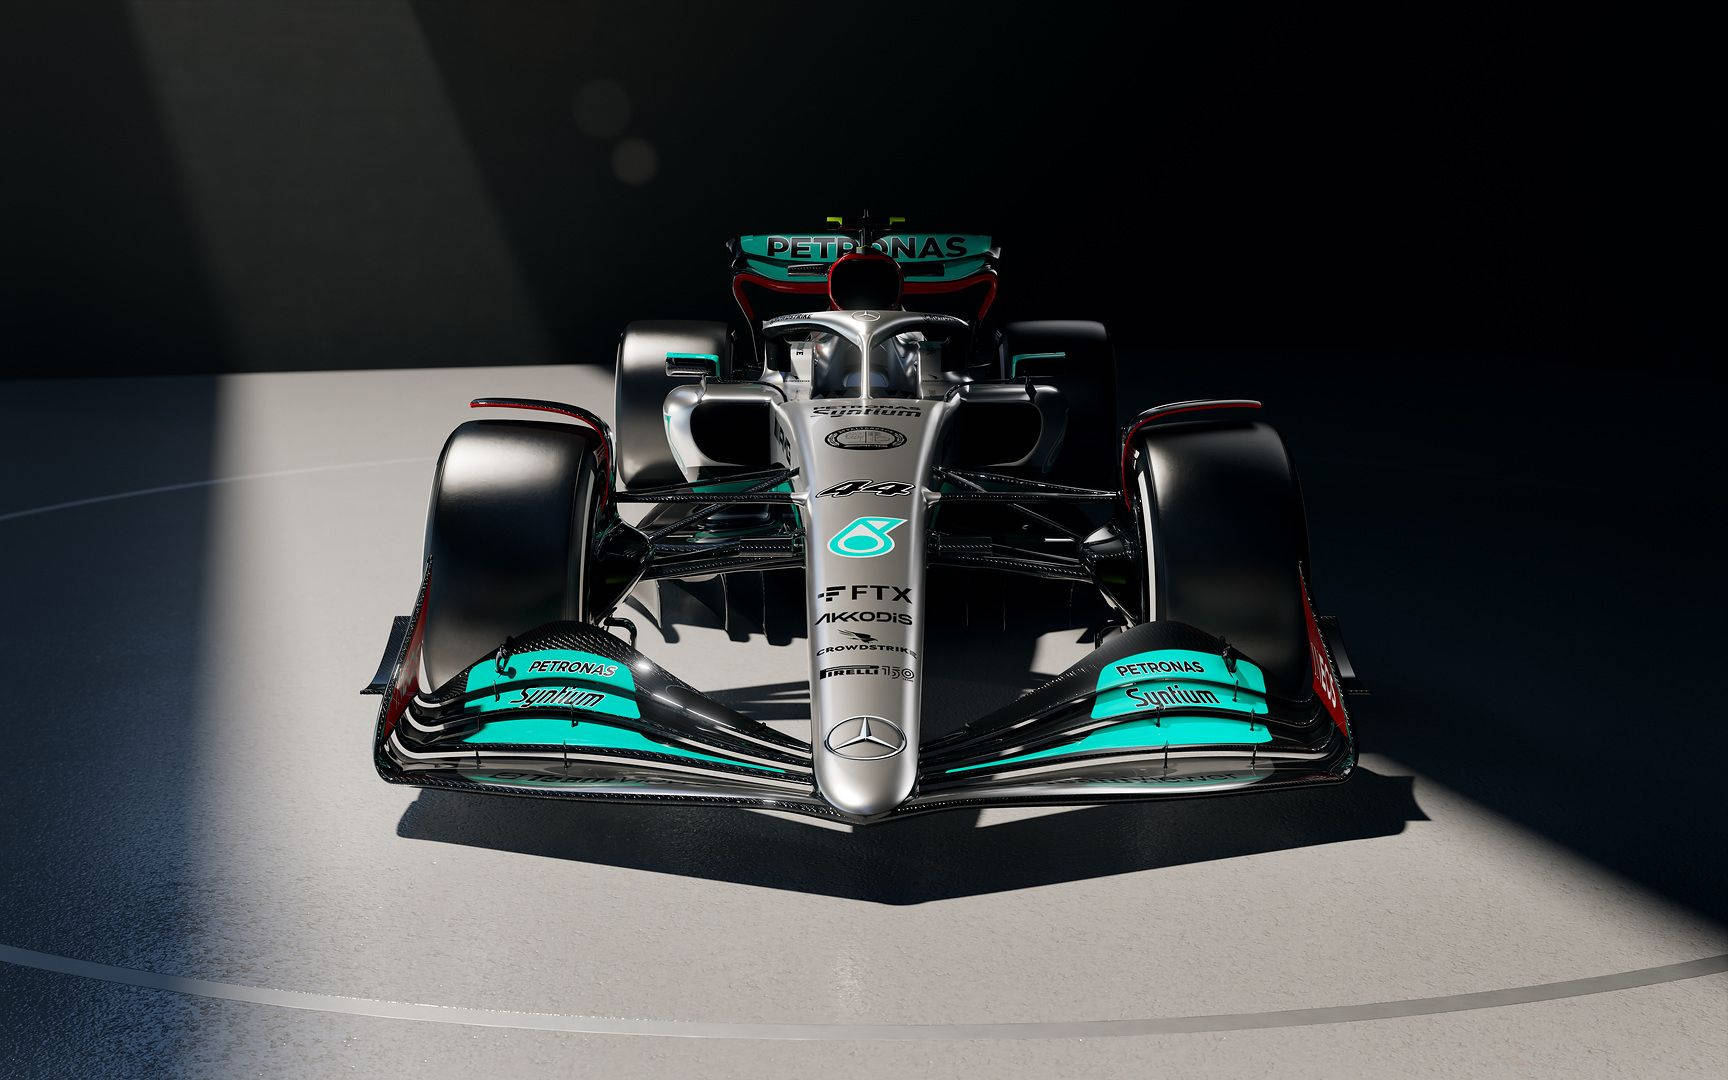 Take your F1 racing experience anywhere with the Mercedes-F1 themed iPhone. Wallpaper